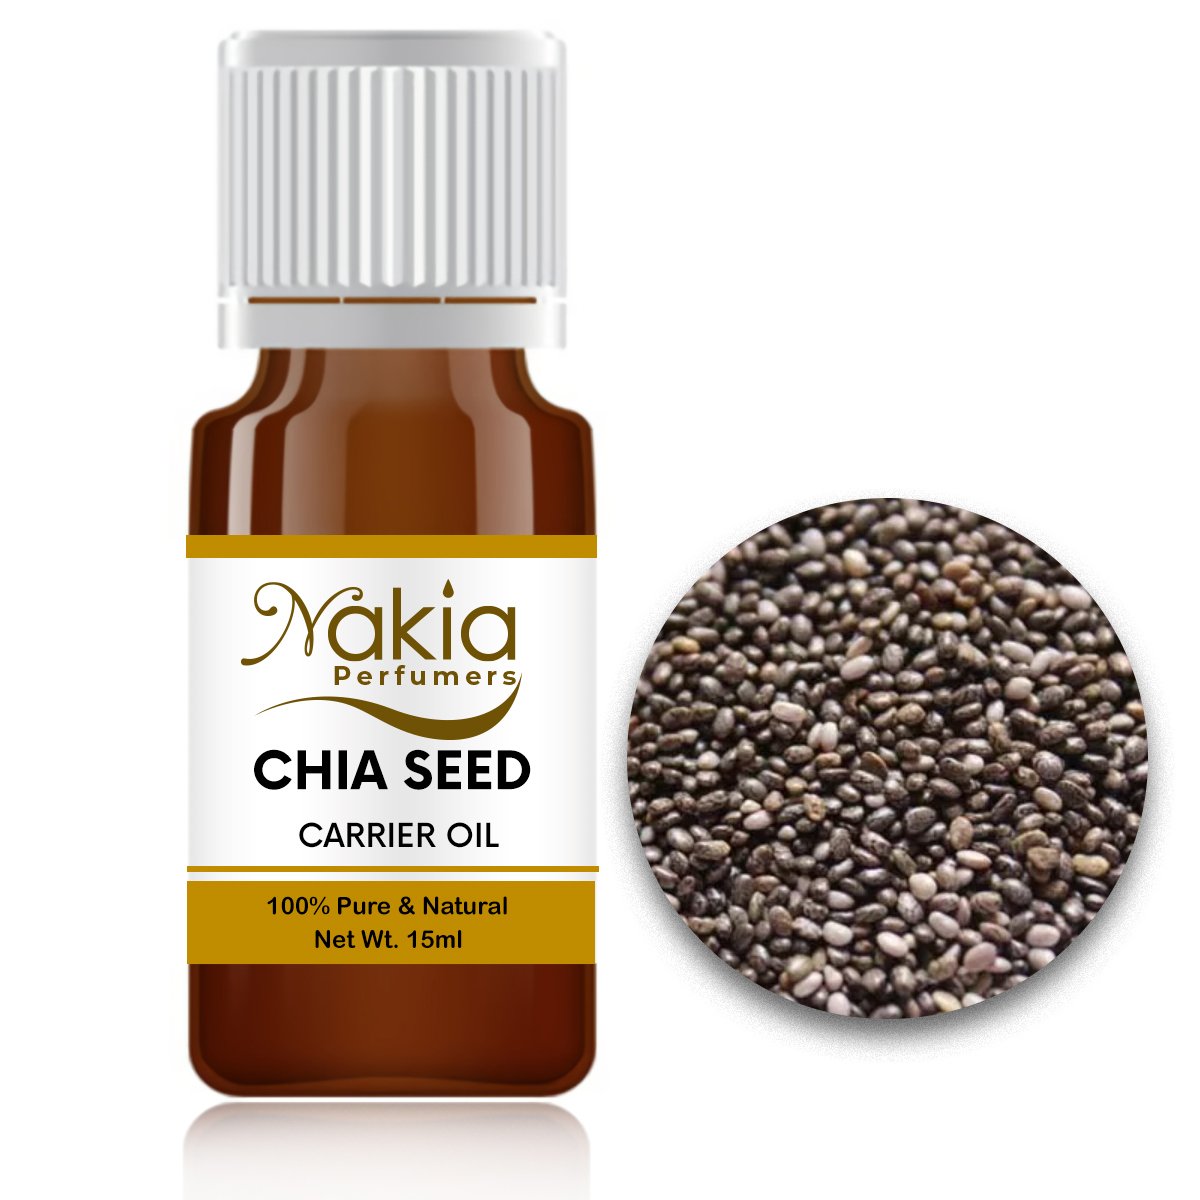 CHIA-SEED CARRIER OIL